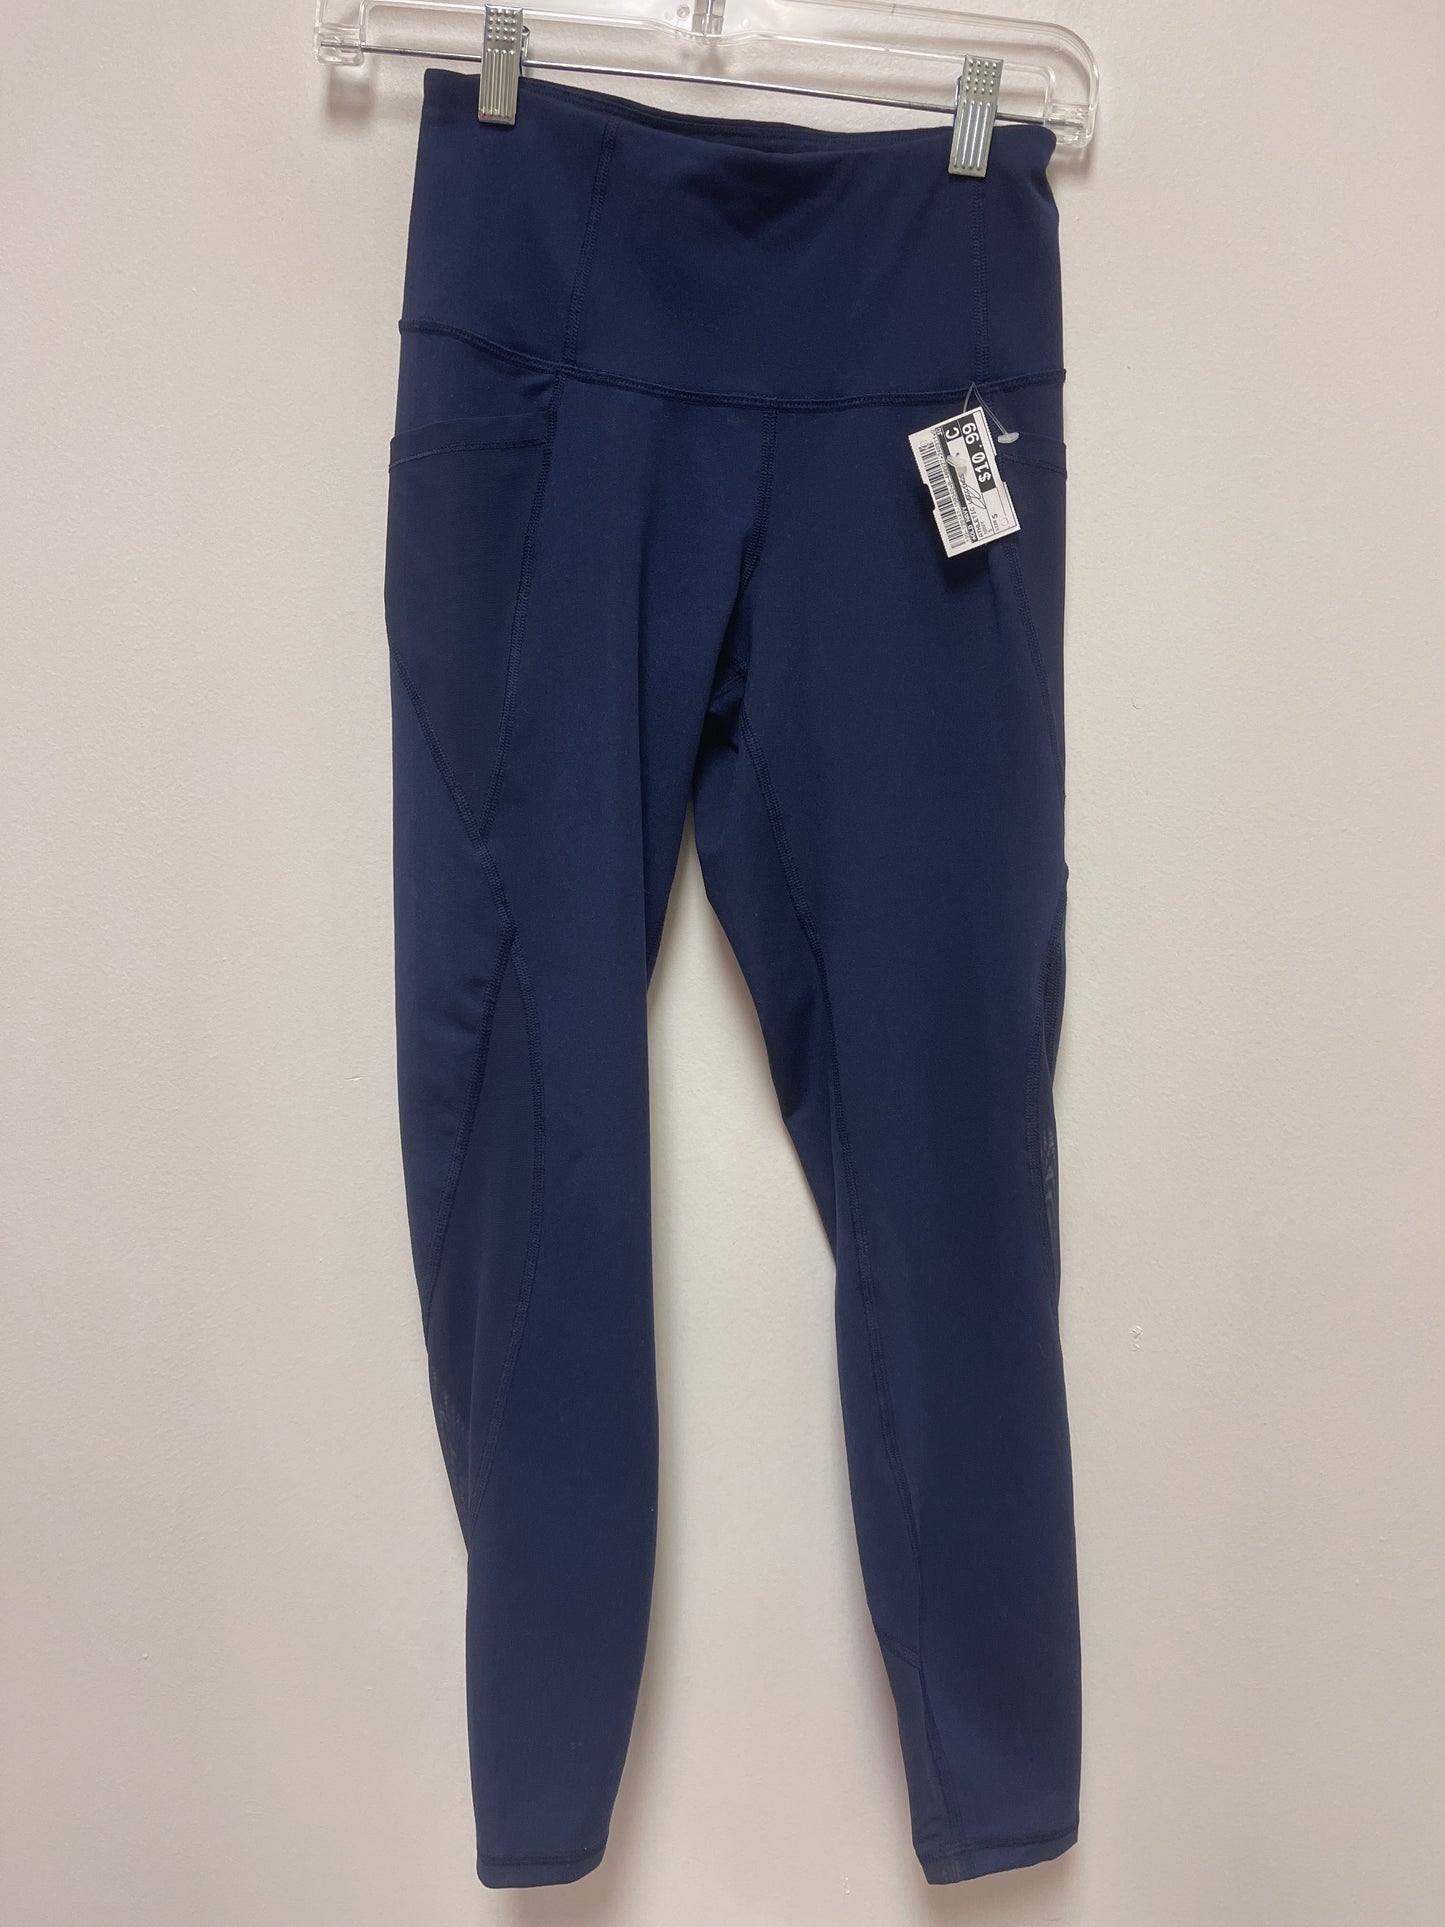 Athletic Leggings By Old Navy  Size: S